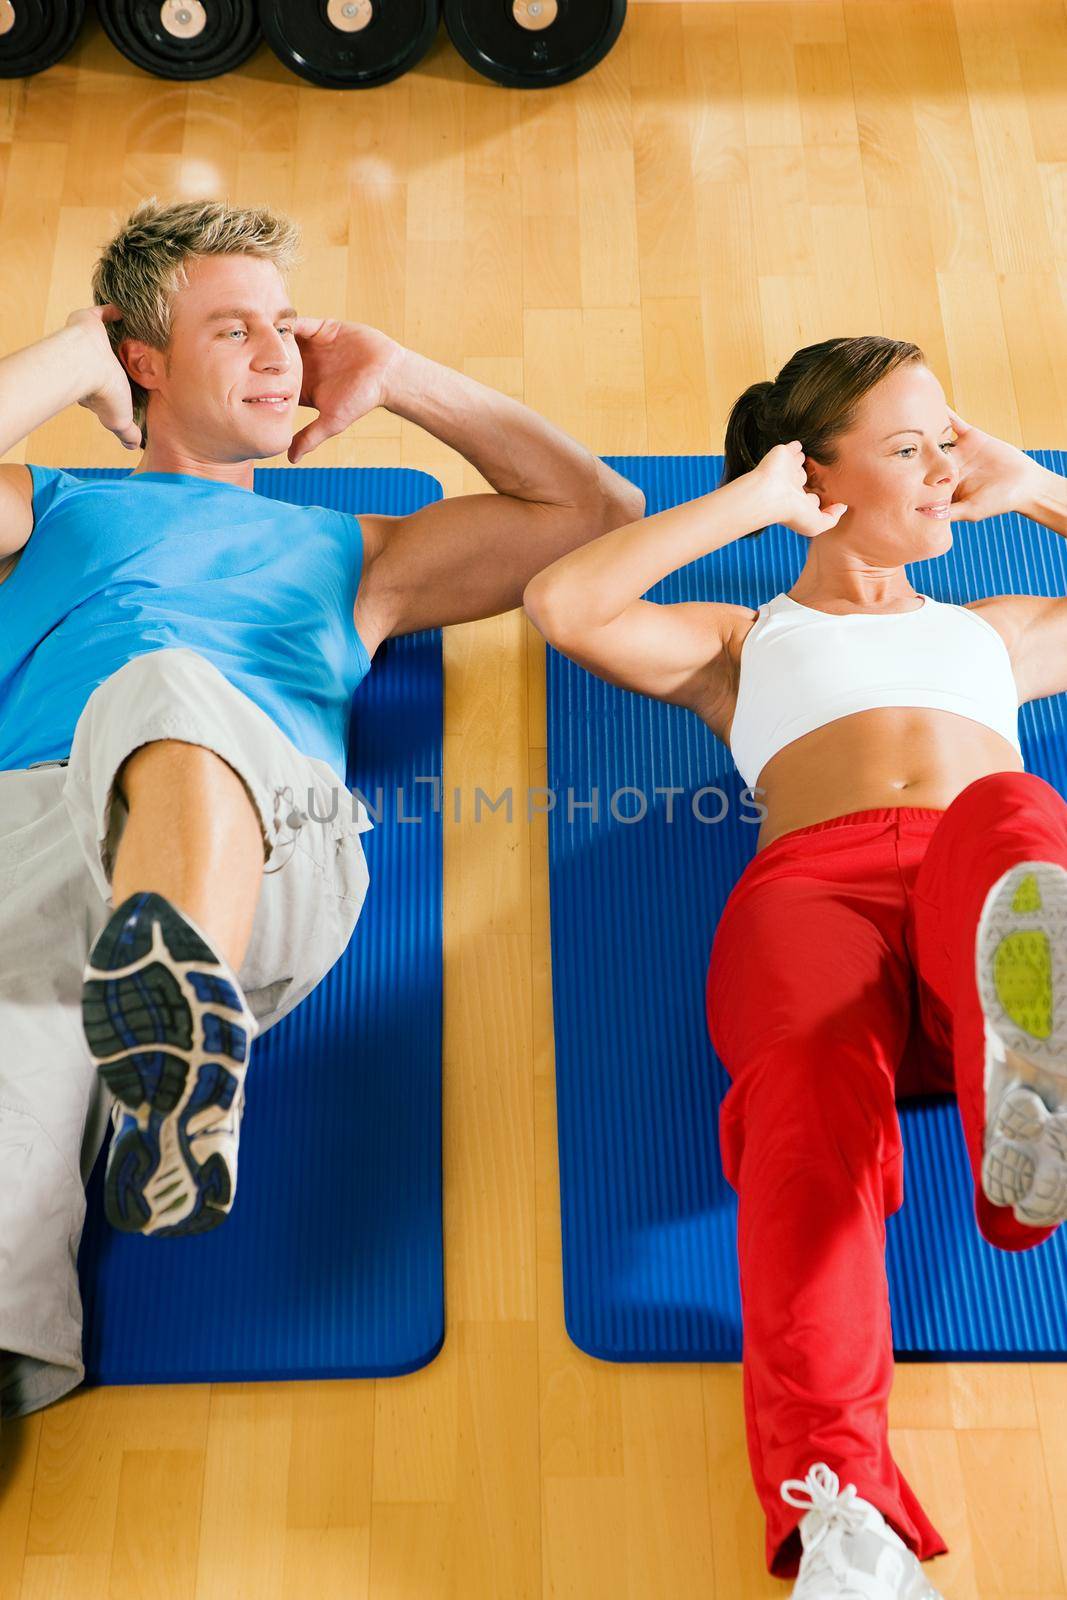 Couple with brightly colored clothes doing sit-ups in the gym